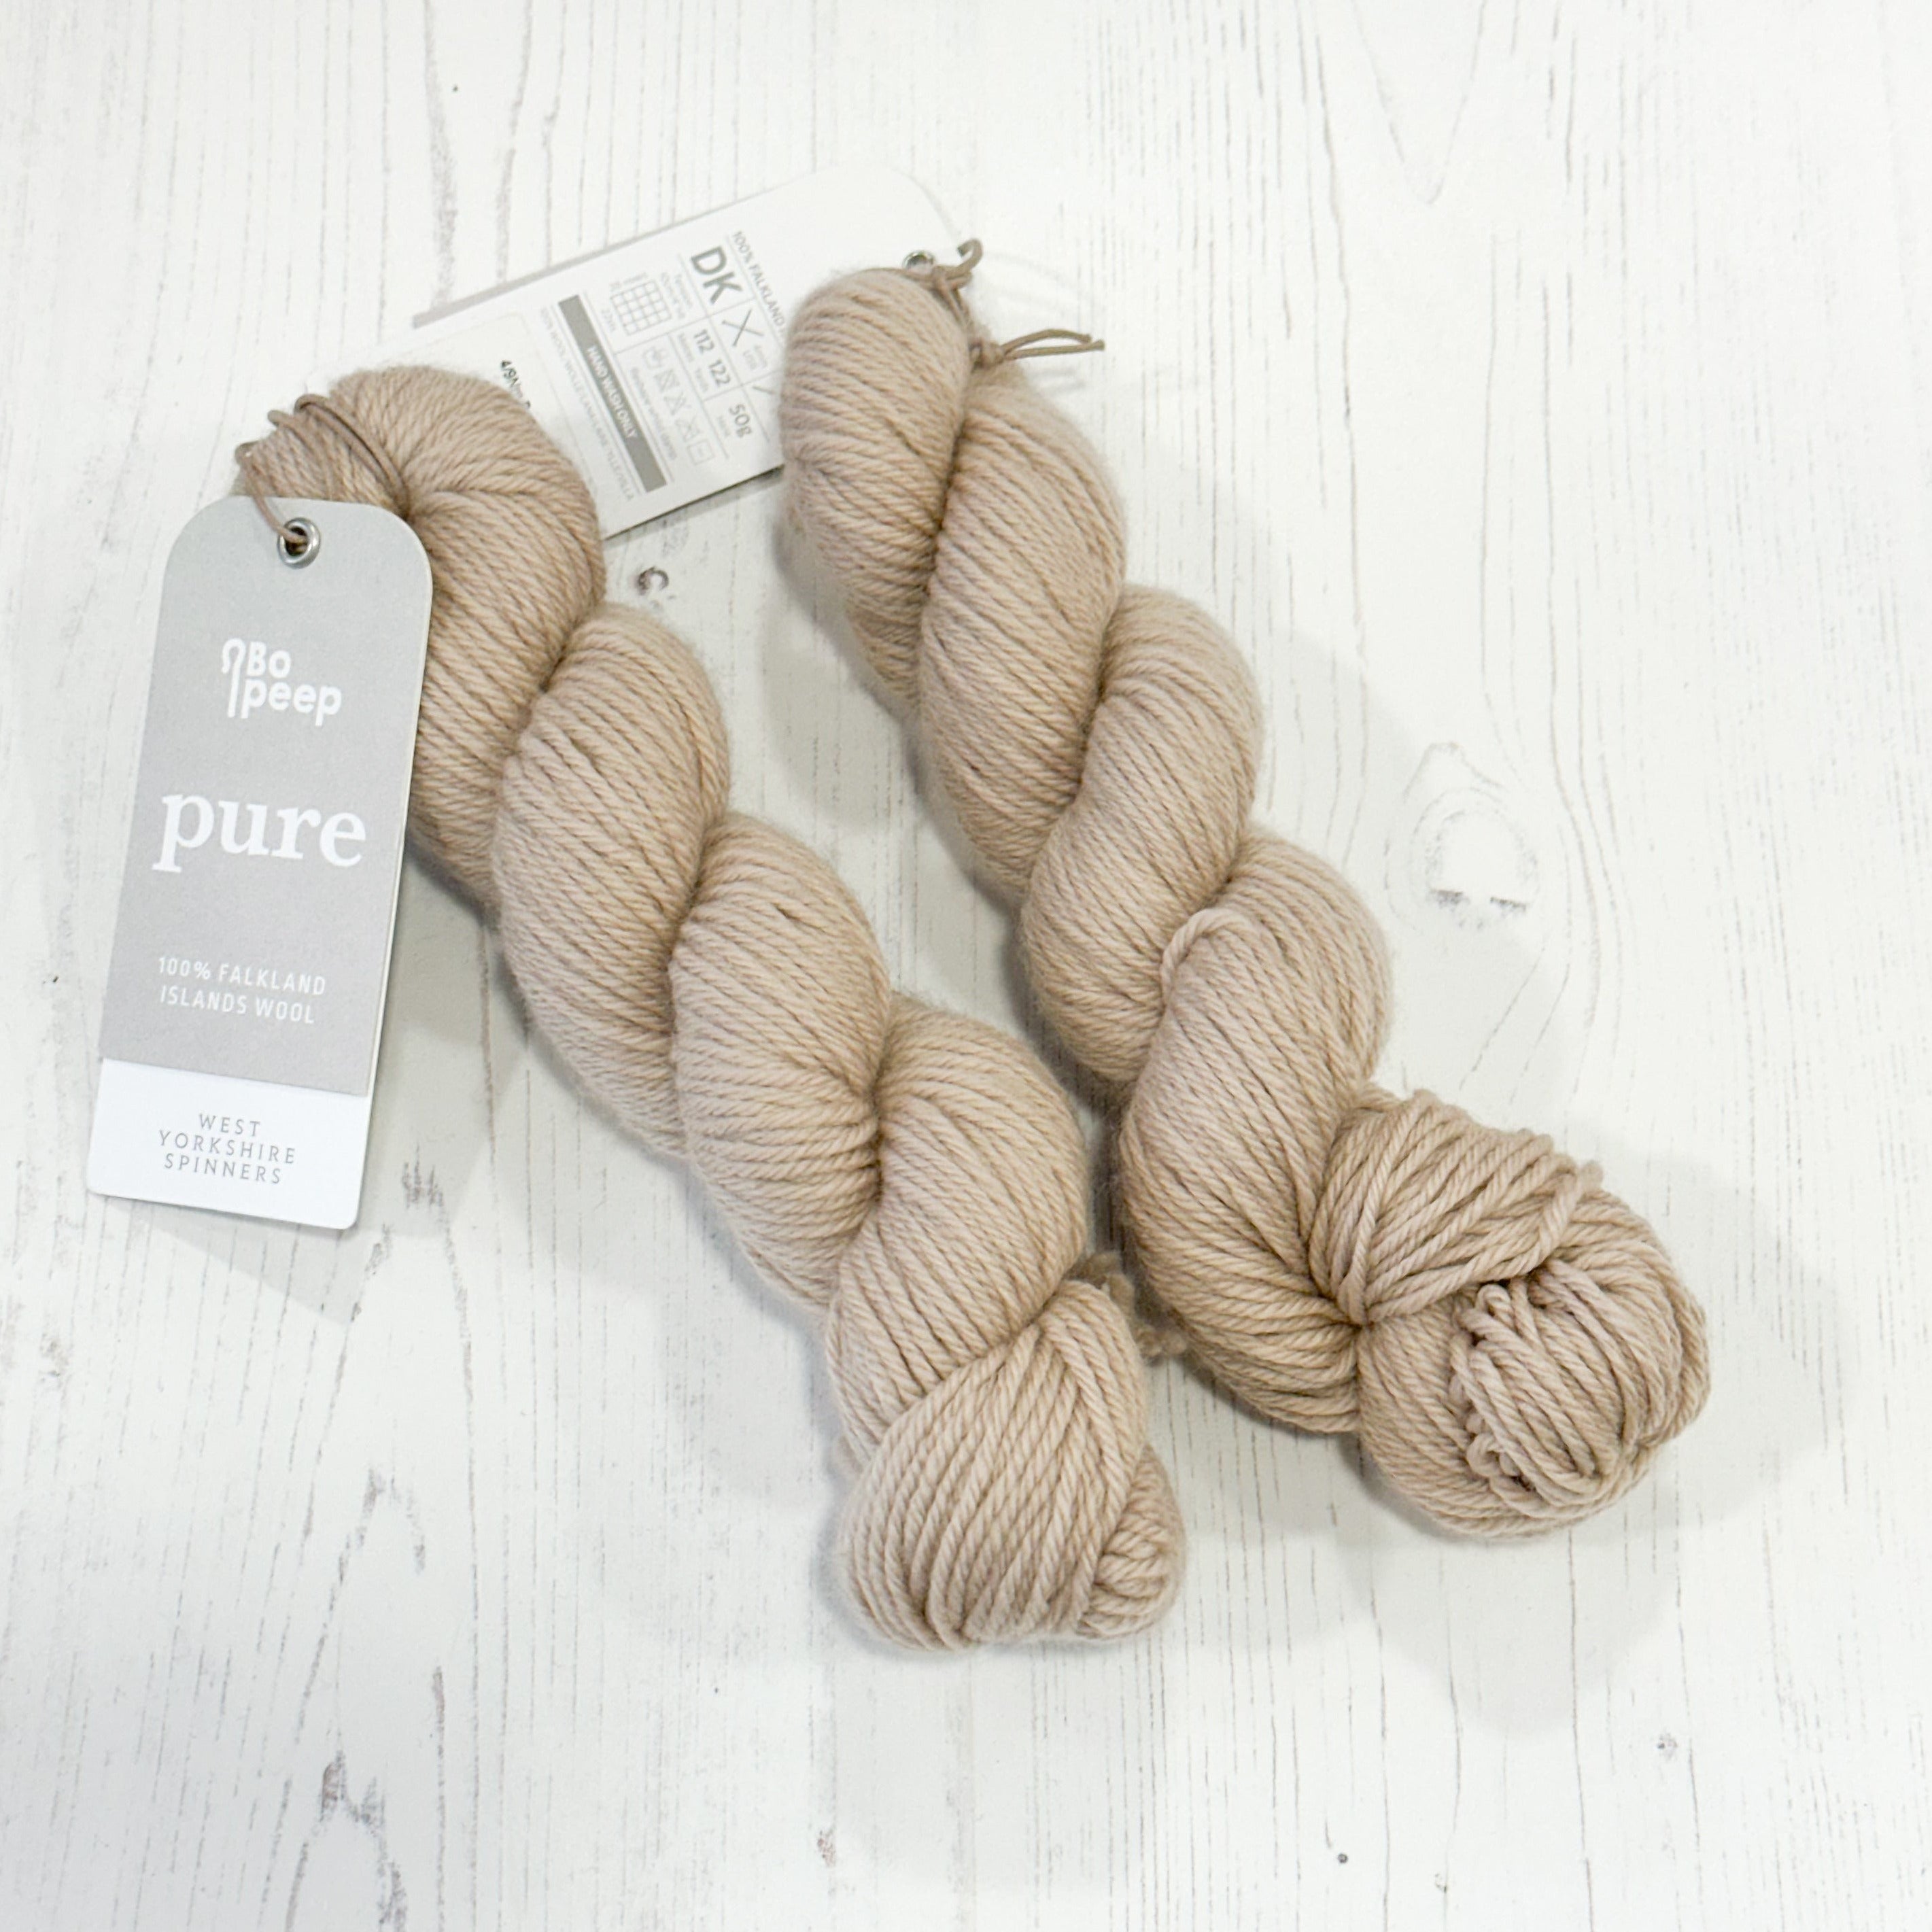 WYS Pure DK (2 x 50g balls of Sand 208: End of Dye Lot)